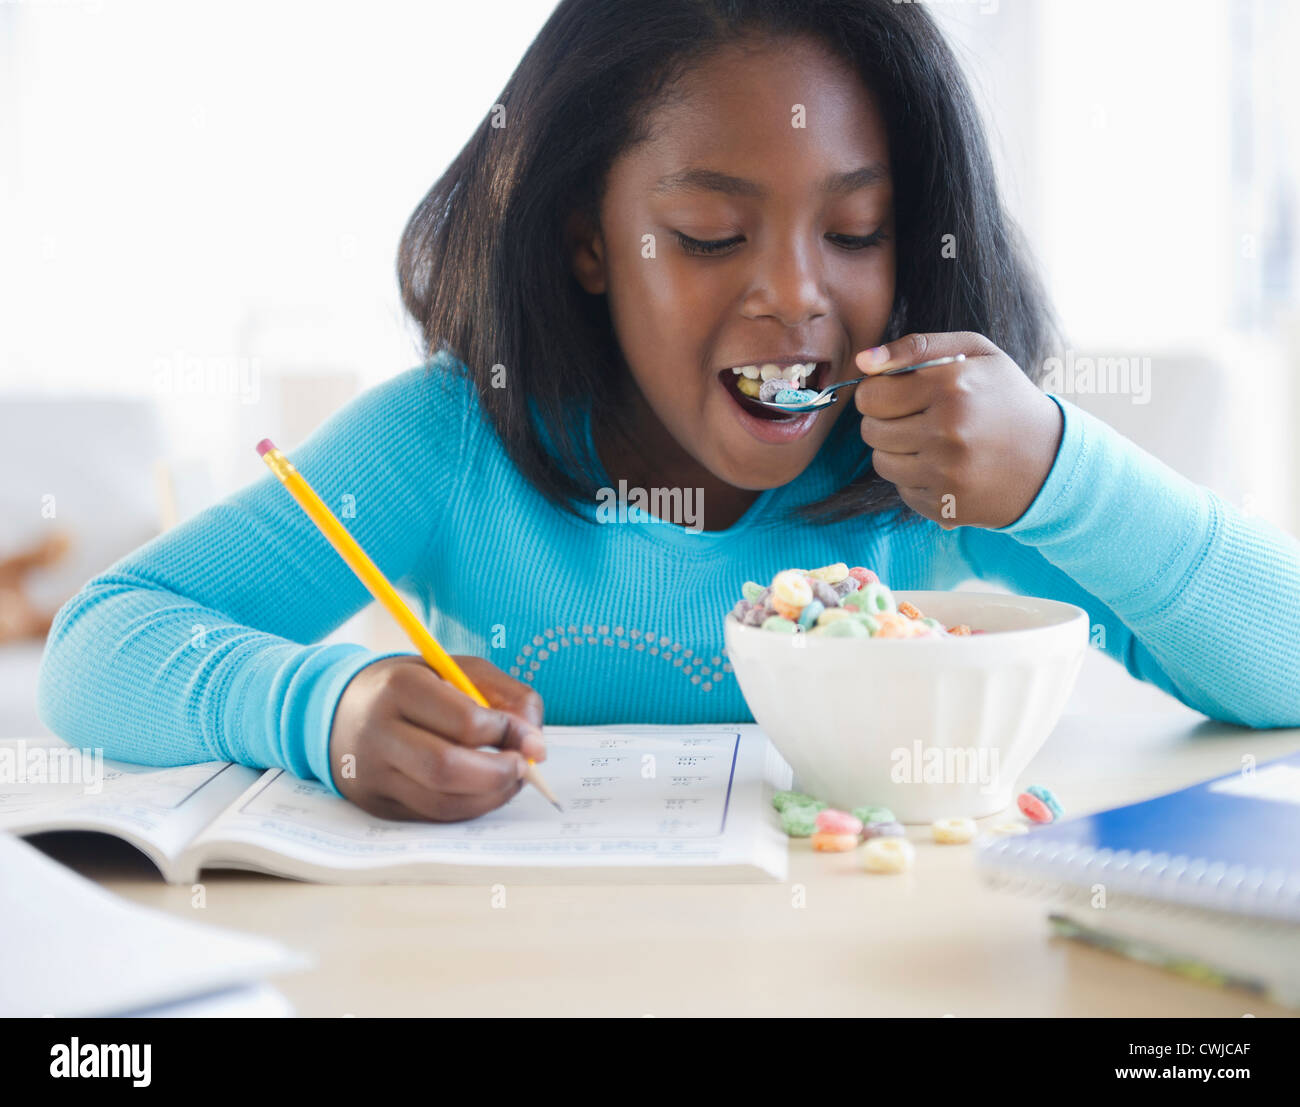 Black girl eating cereal and writing in workbook Stock Photo